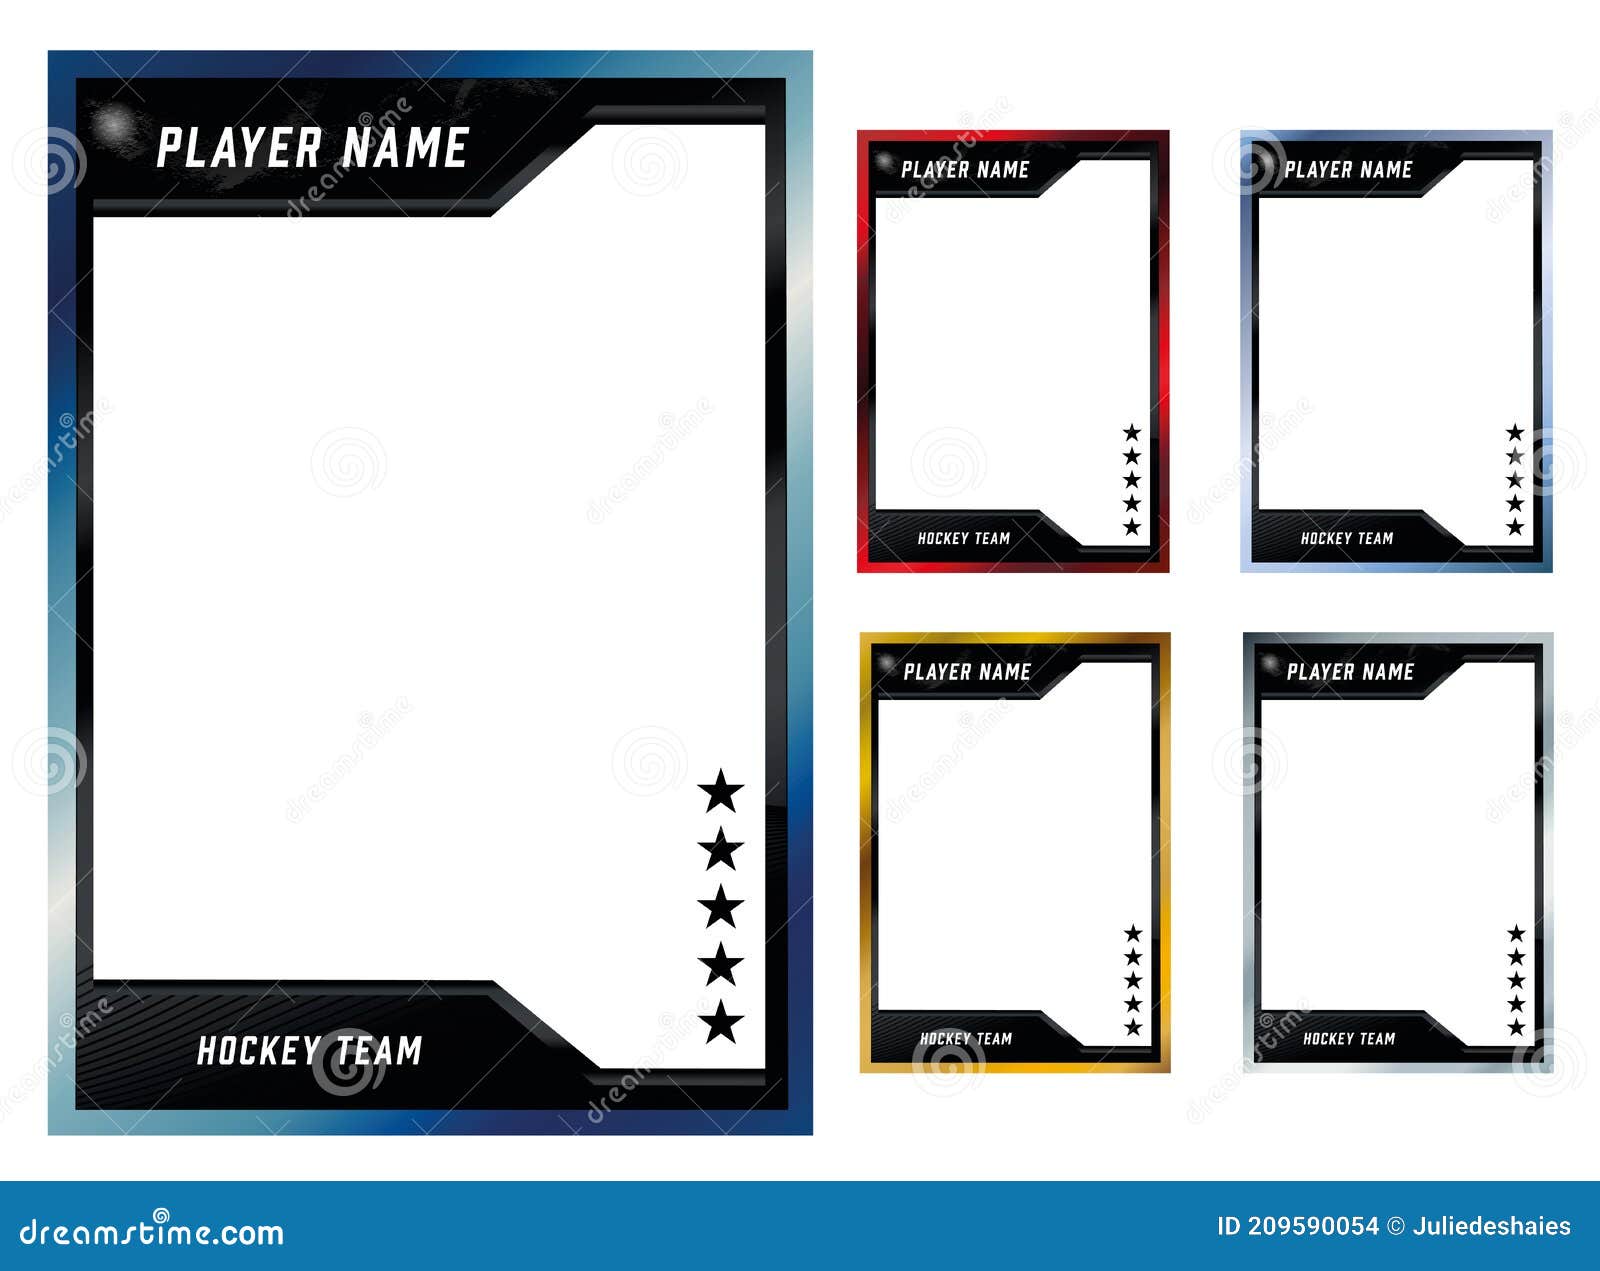 Hockey Player Card Frame Template Design Stock Vector For Trading Cards Templates Free Download